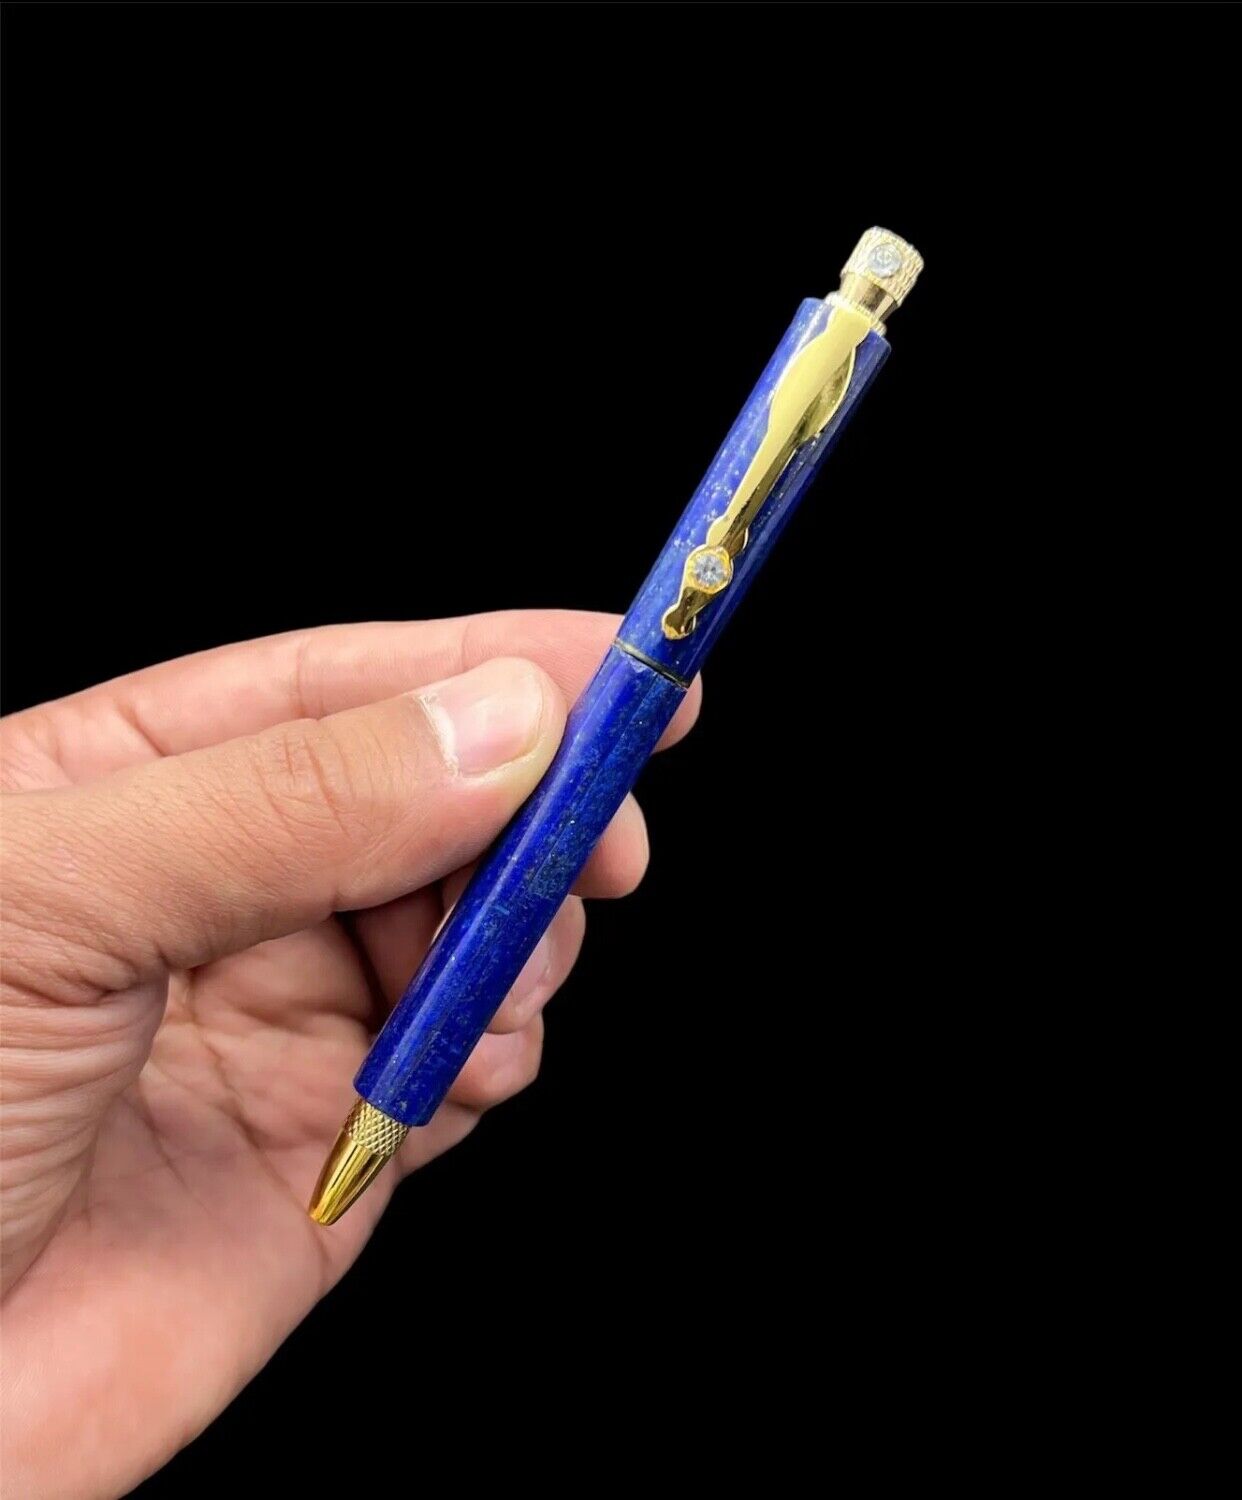 Top Quality of Lapiz Lazuli Pen combine with Pyrite from Afghanistan.